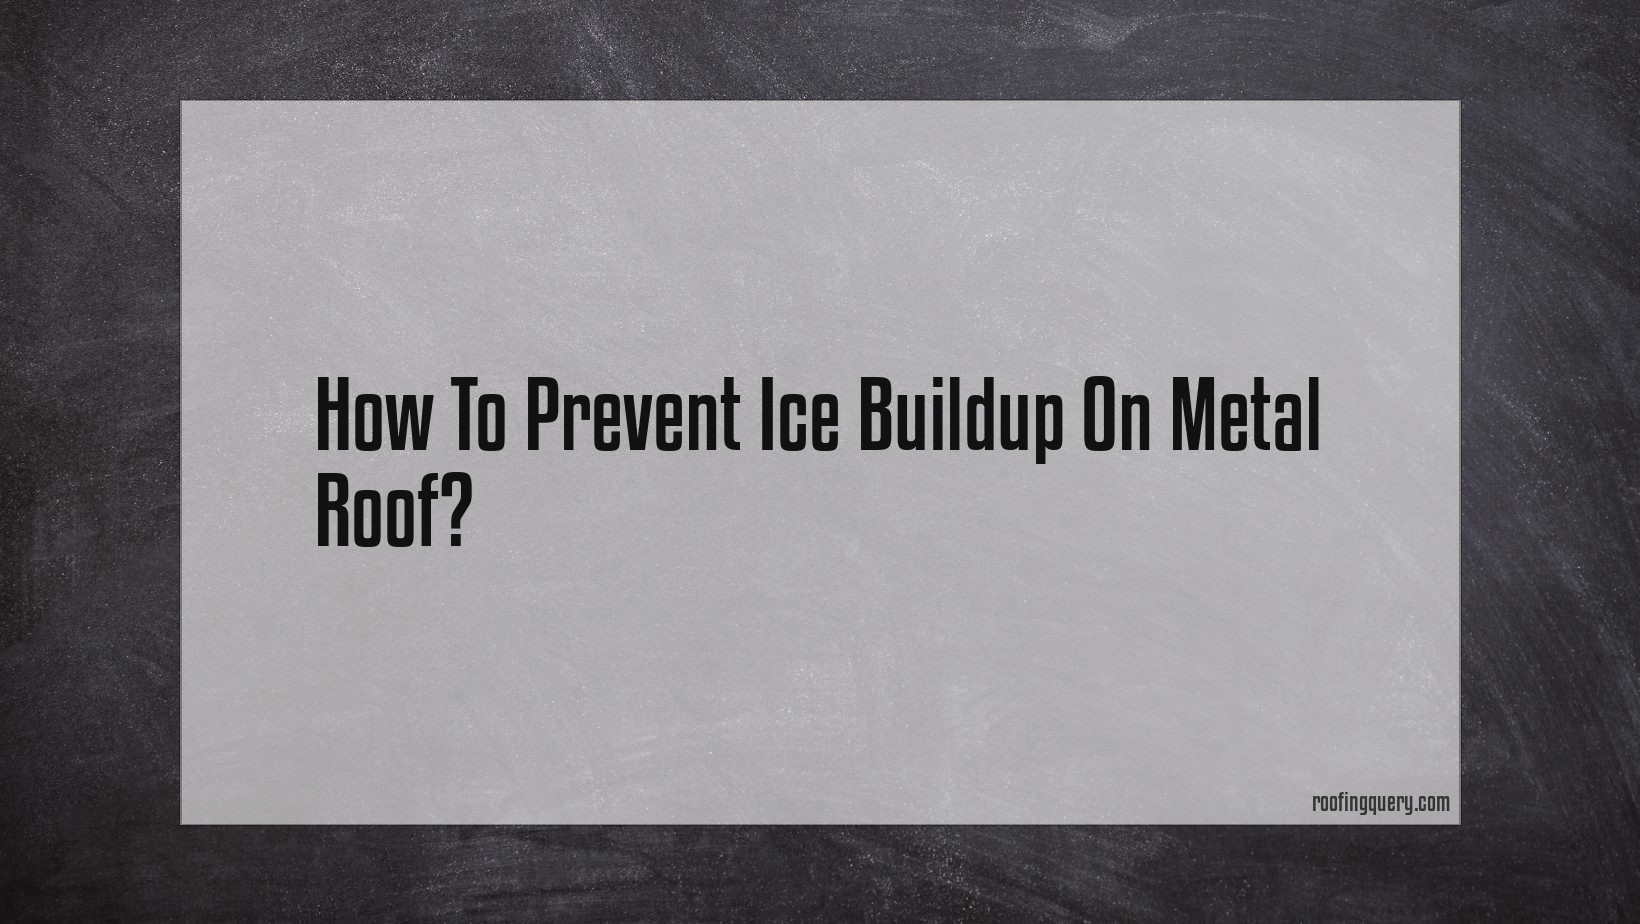 How To Prevent Ice Buildup On Metal Roof?